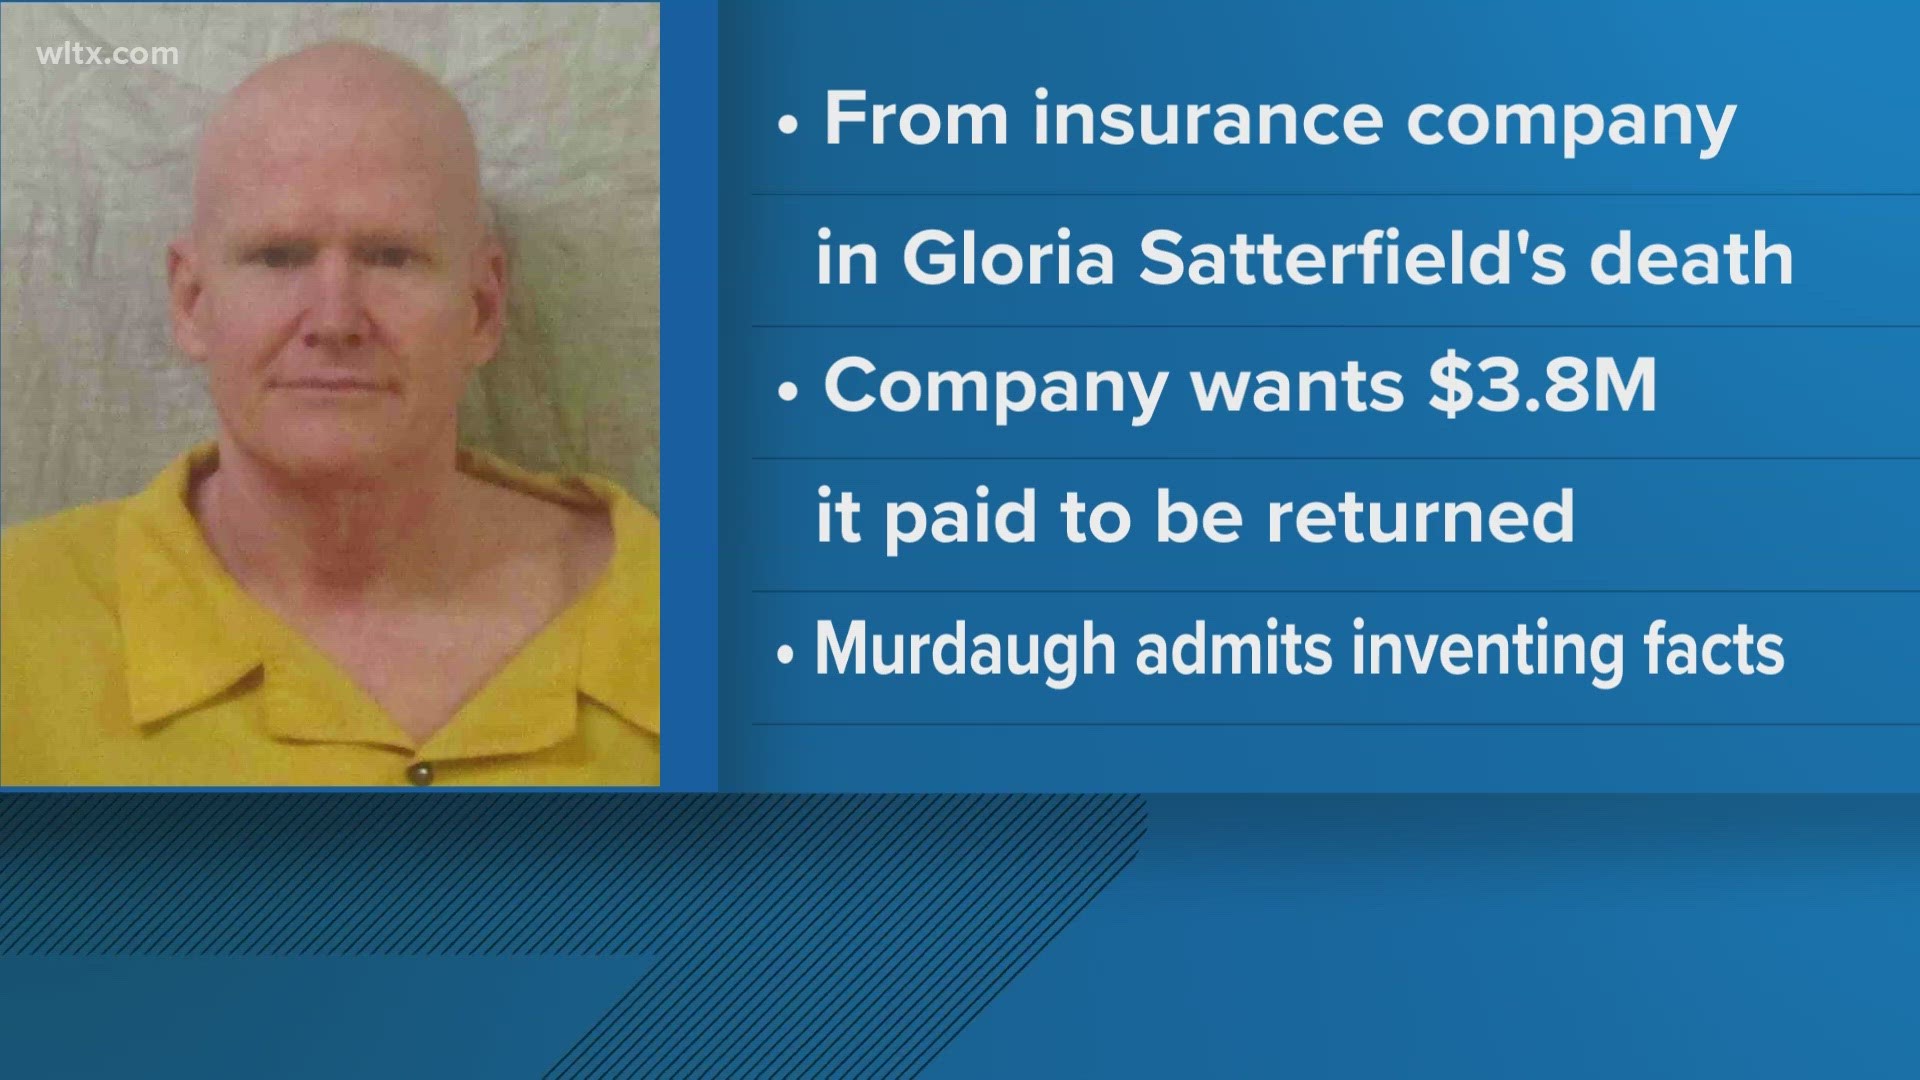 Convicted murderer Alex Murdaugh is being sued by the insurance company that paid for the death of his housekeeper.